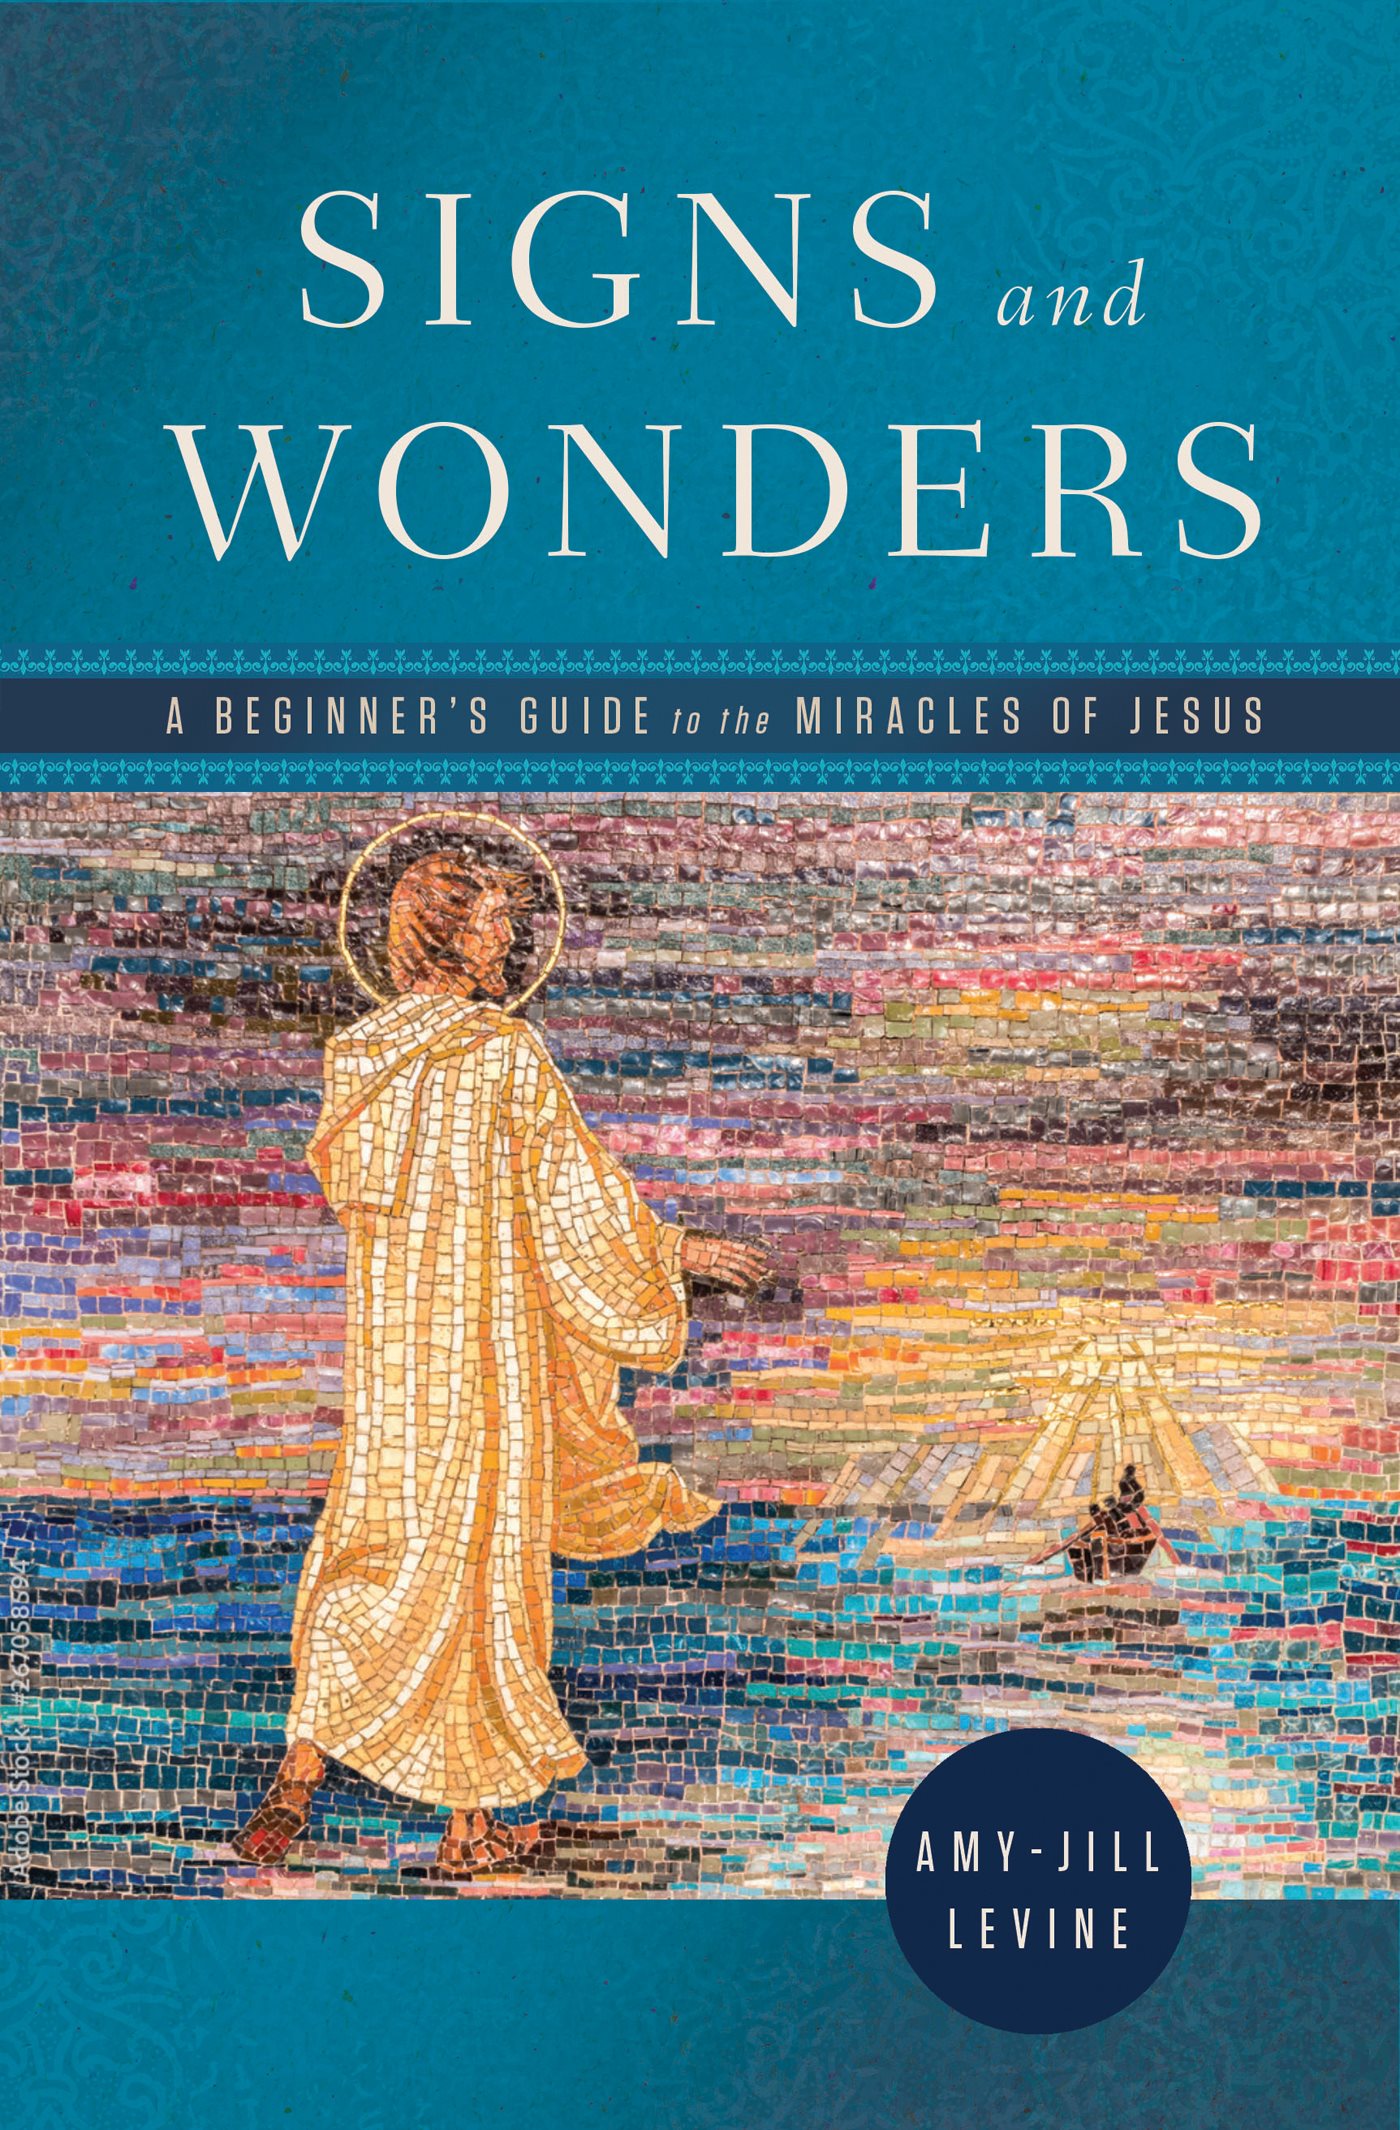 Signs and Wonders Signs and Wonders A Beginners Guide to the Miracles of Jesus - photo 1